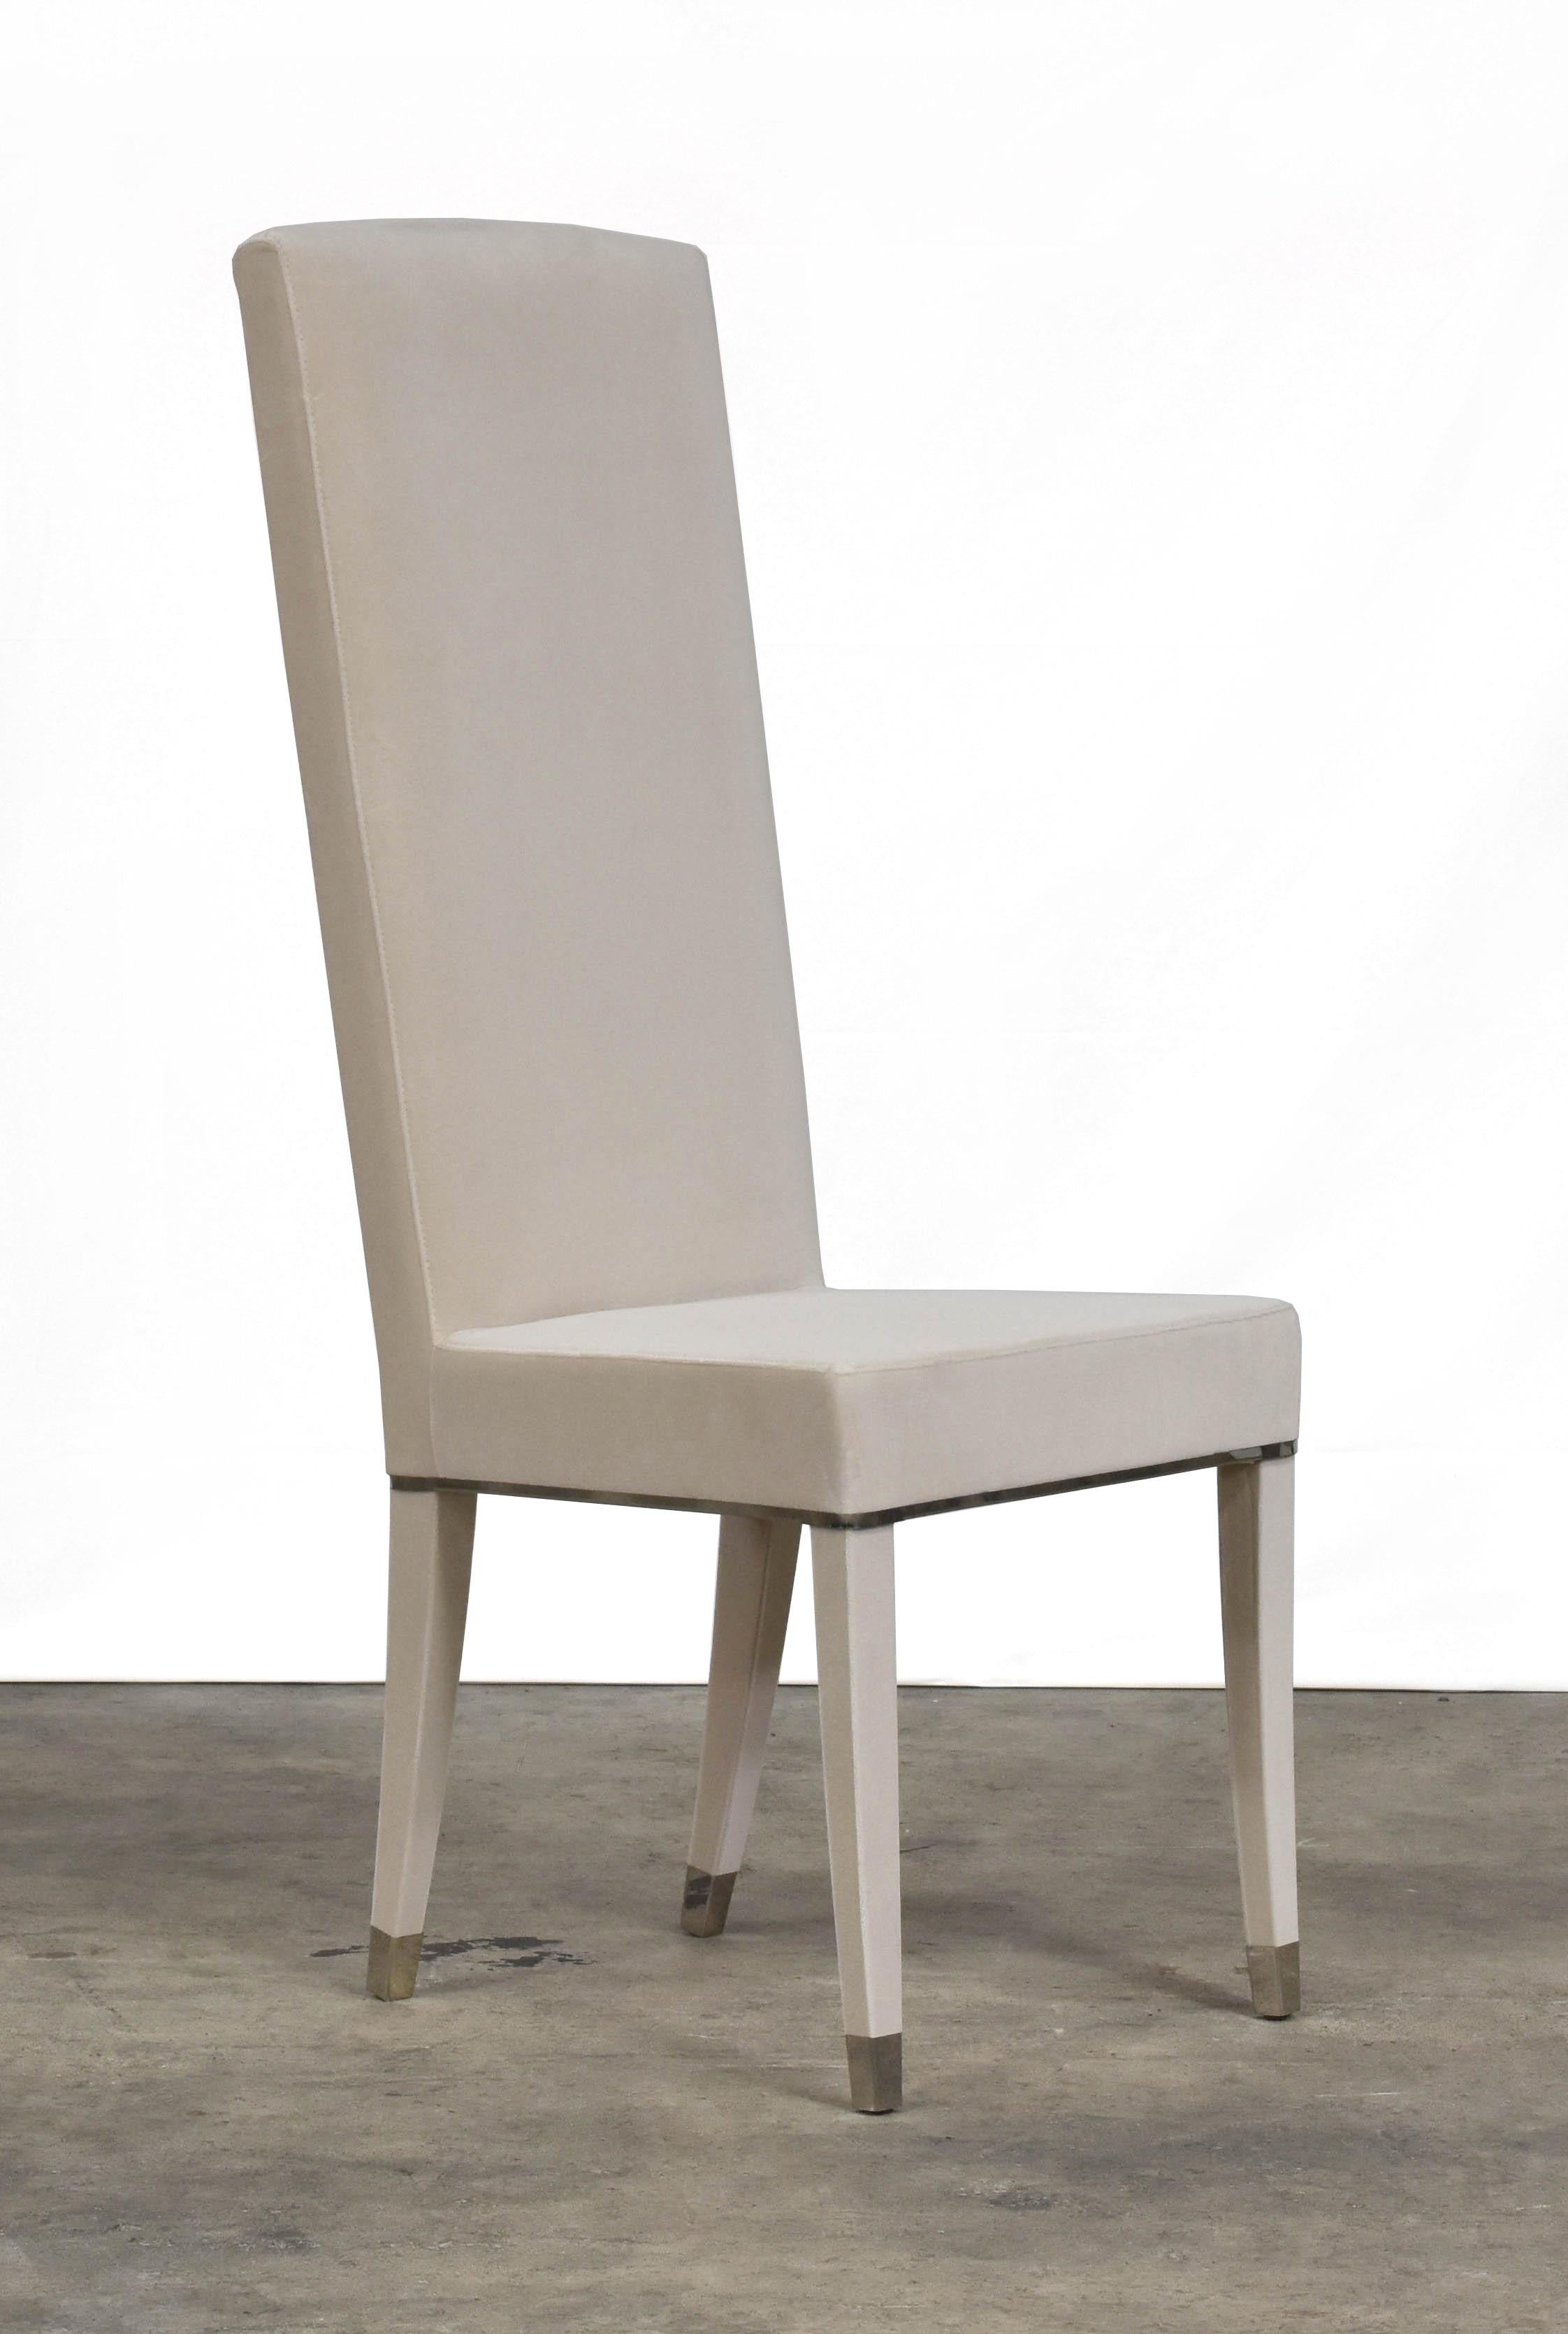 Modern Heritage Collection Plisse Chair For Sale